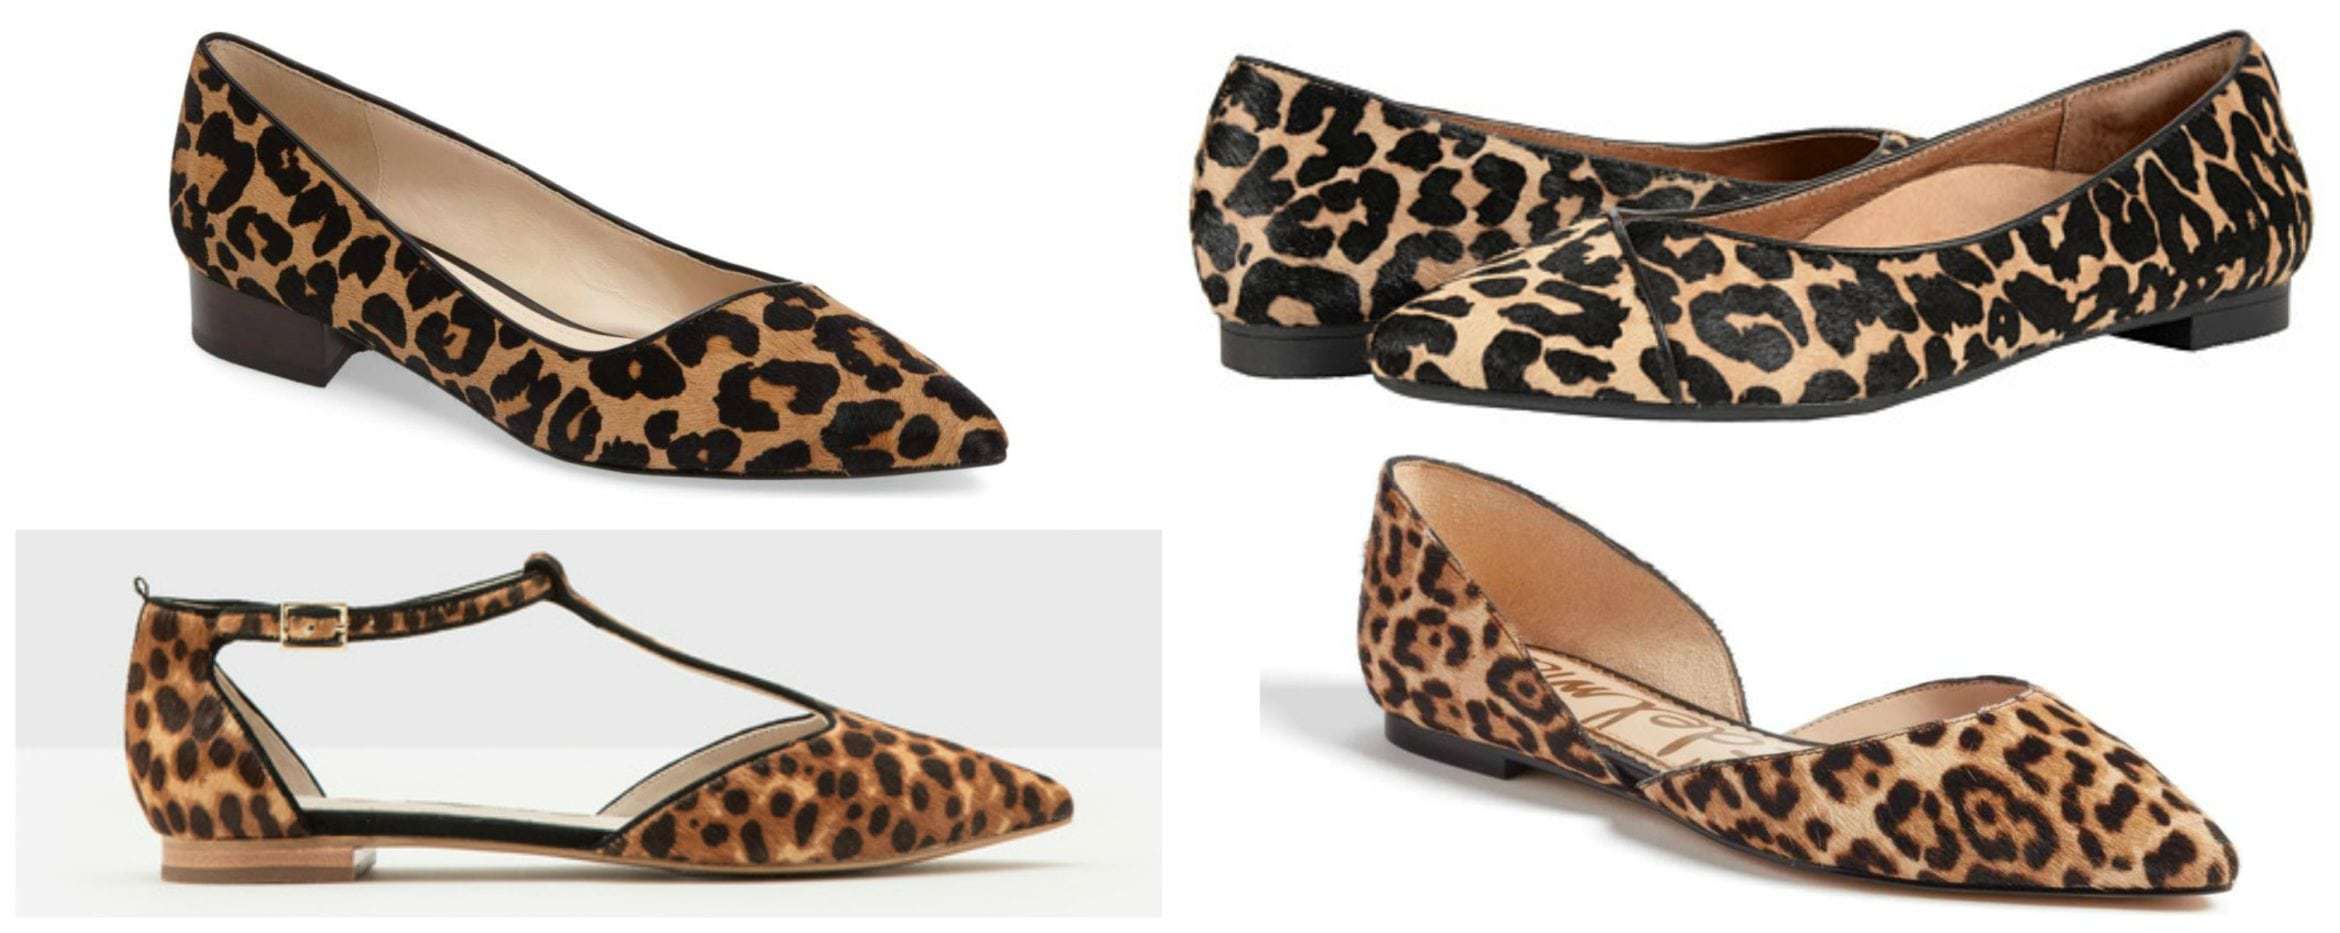 the best leopard print shoes for fall featured by popular DC petite fashion blogger, Wardrobe Oxygen: flats